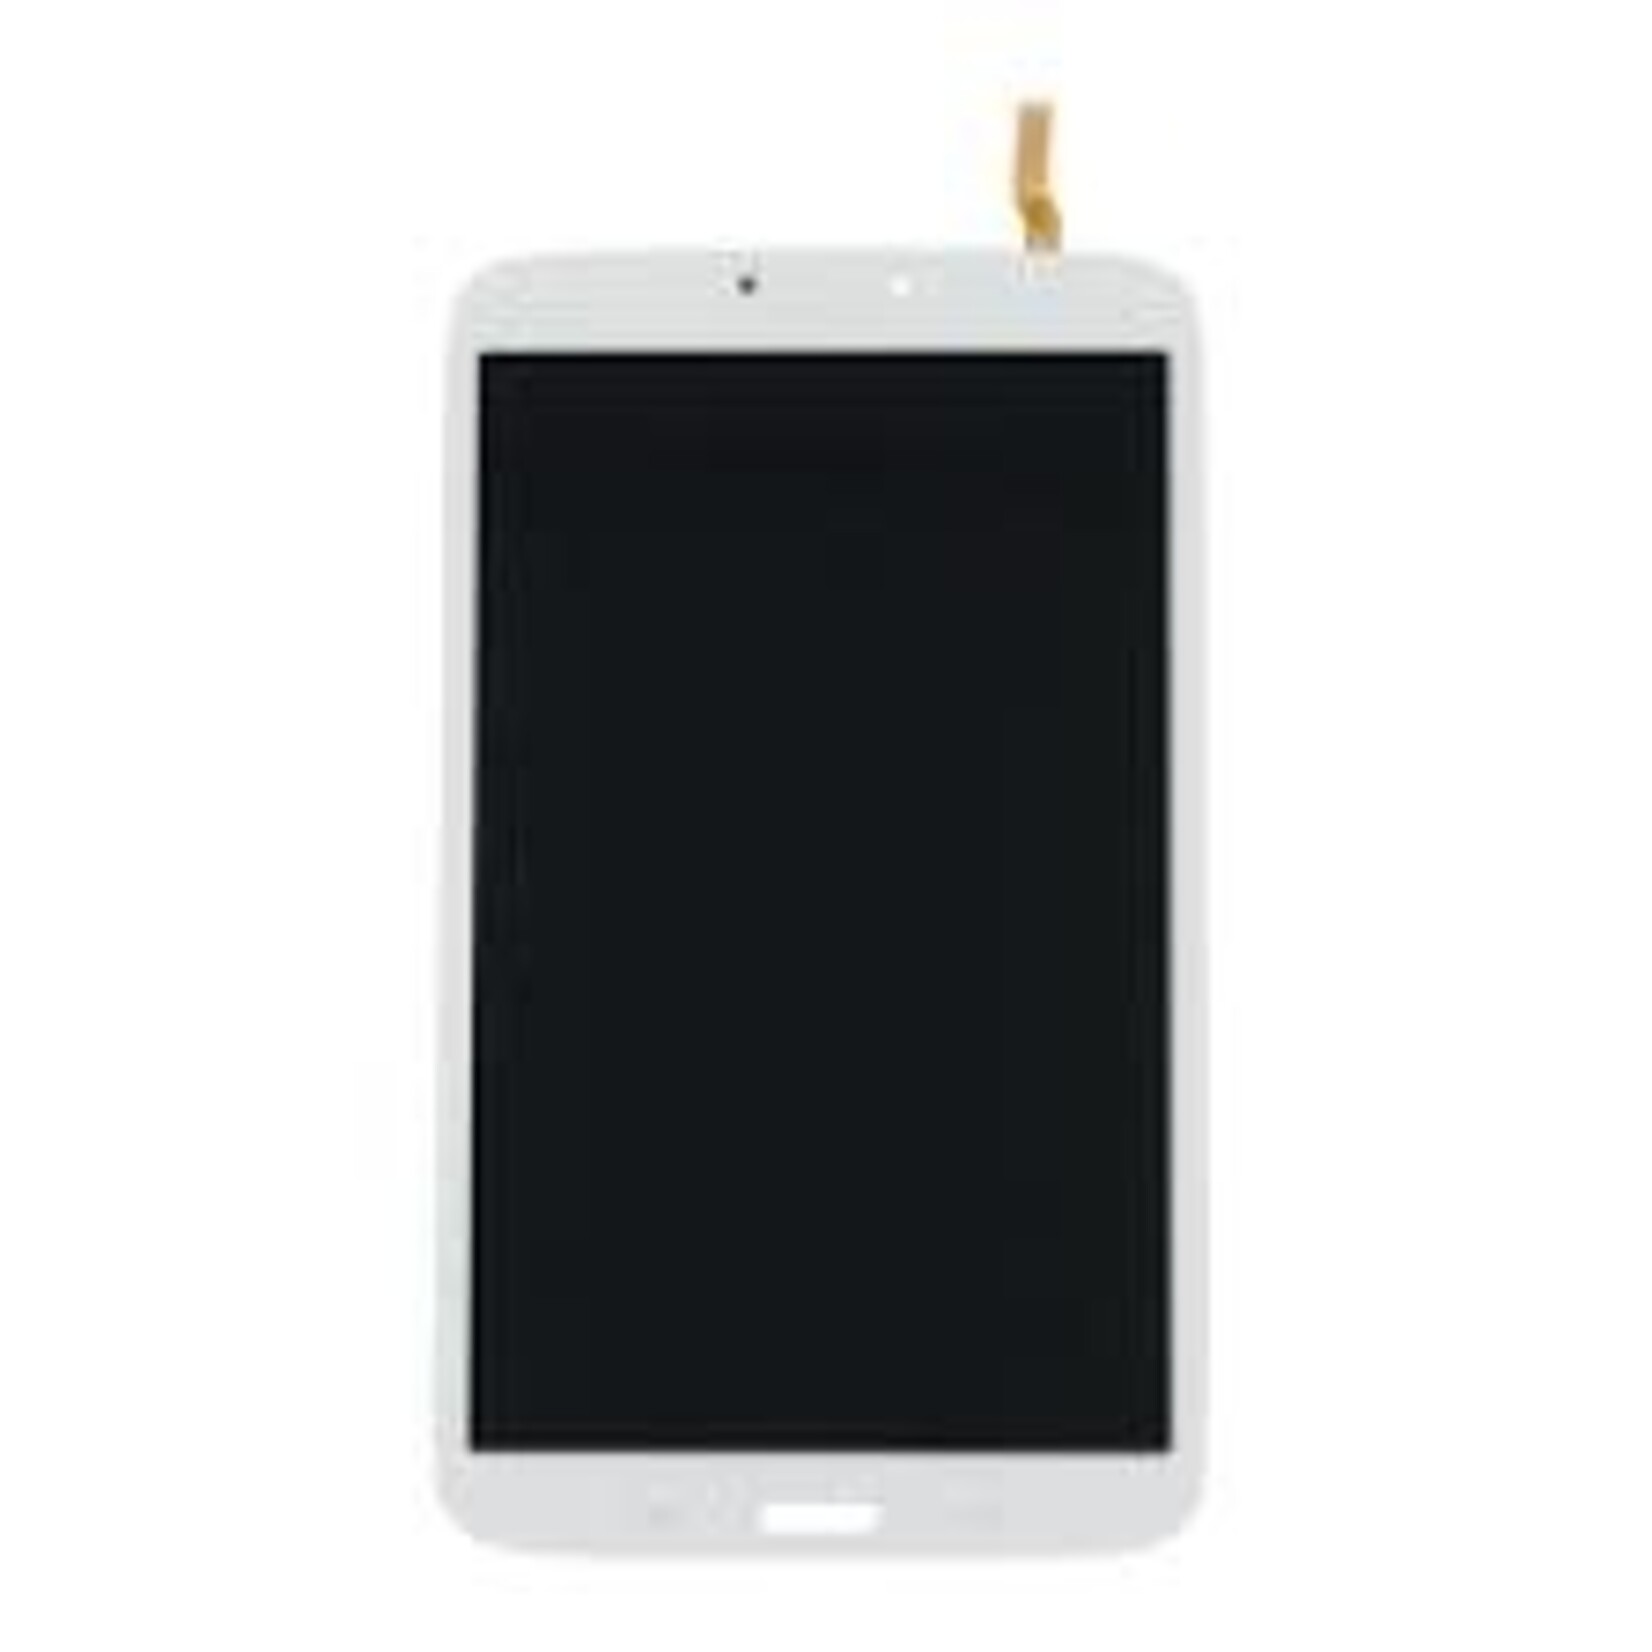 Samsung LCD DIGITIZER ASSEMBLY WHITE SAMSUNG TAB 3 8'' T310 T315